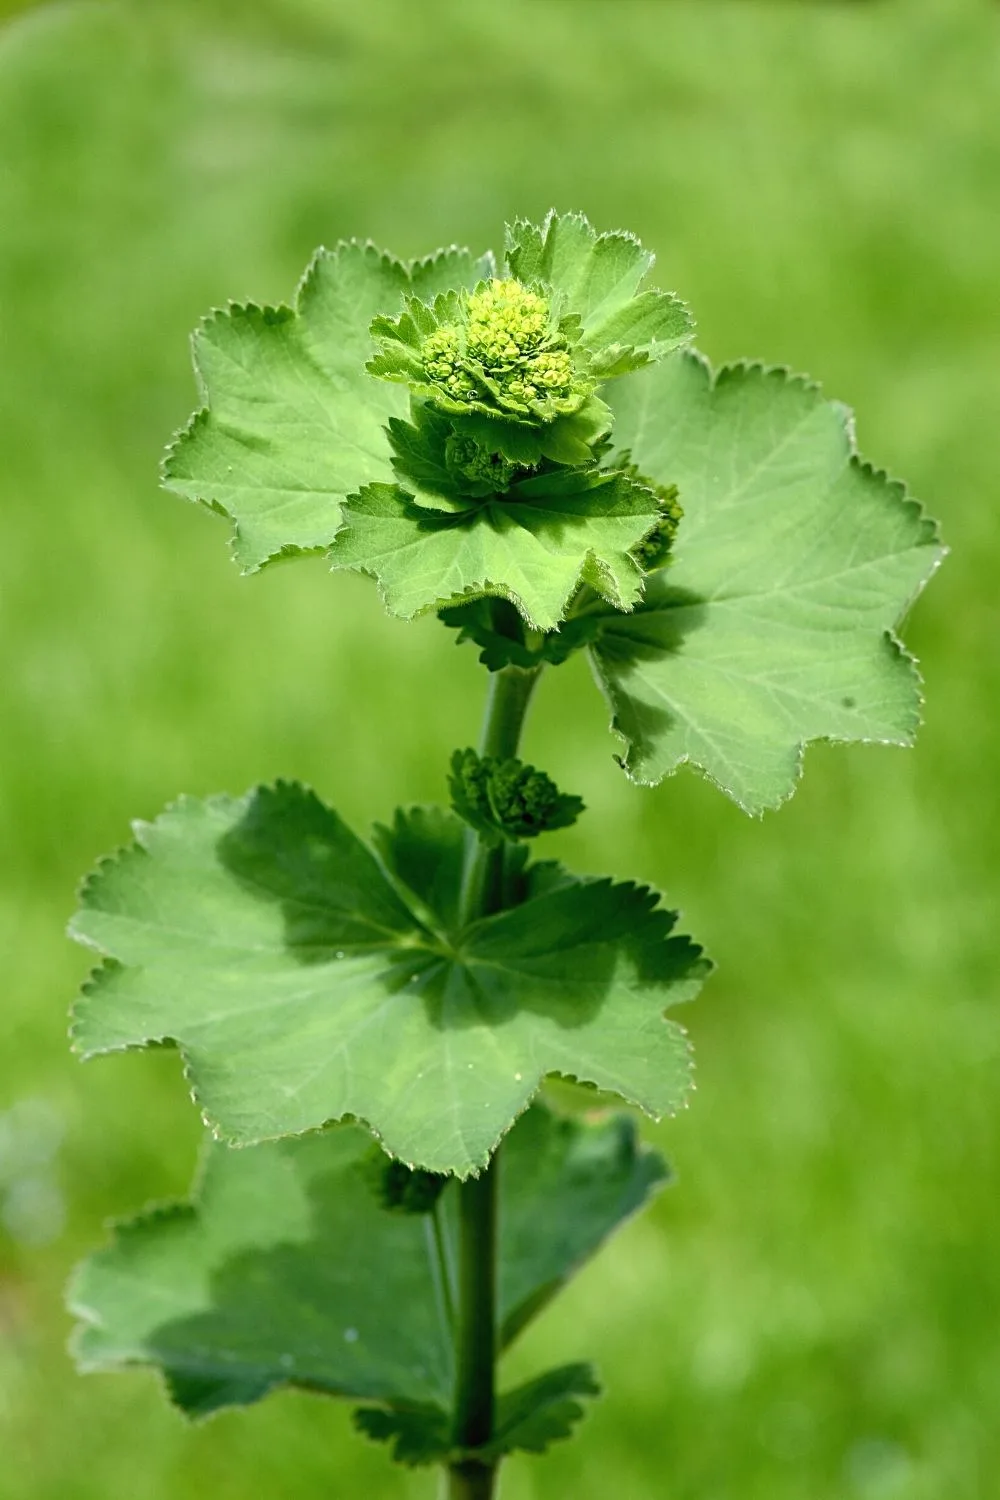 Alchemilla Mollis, aka Lady Mantle, is another great plant that will thrive when grown in the west-facing side of the house